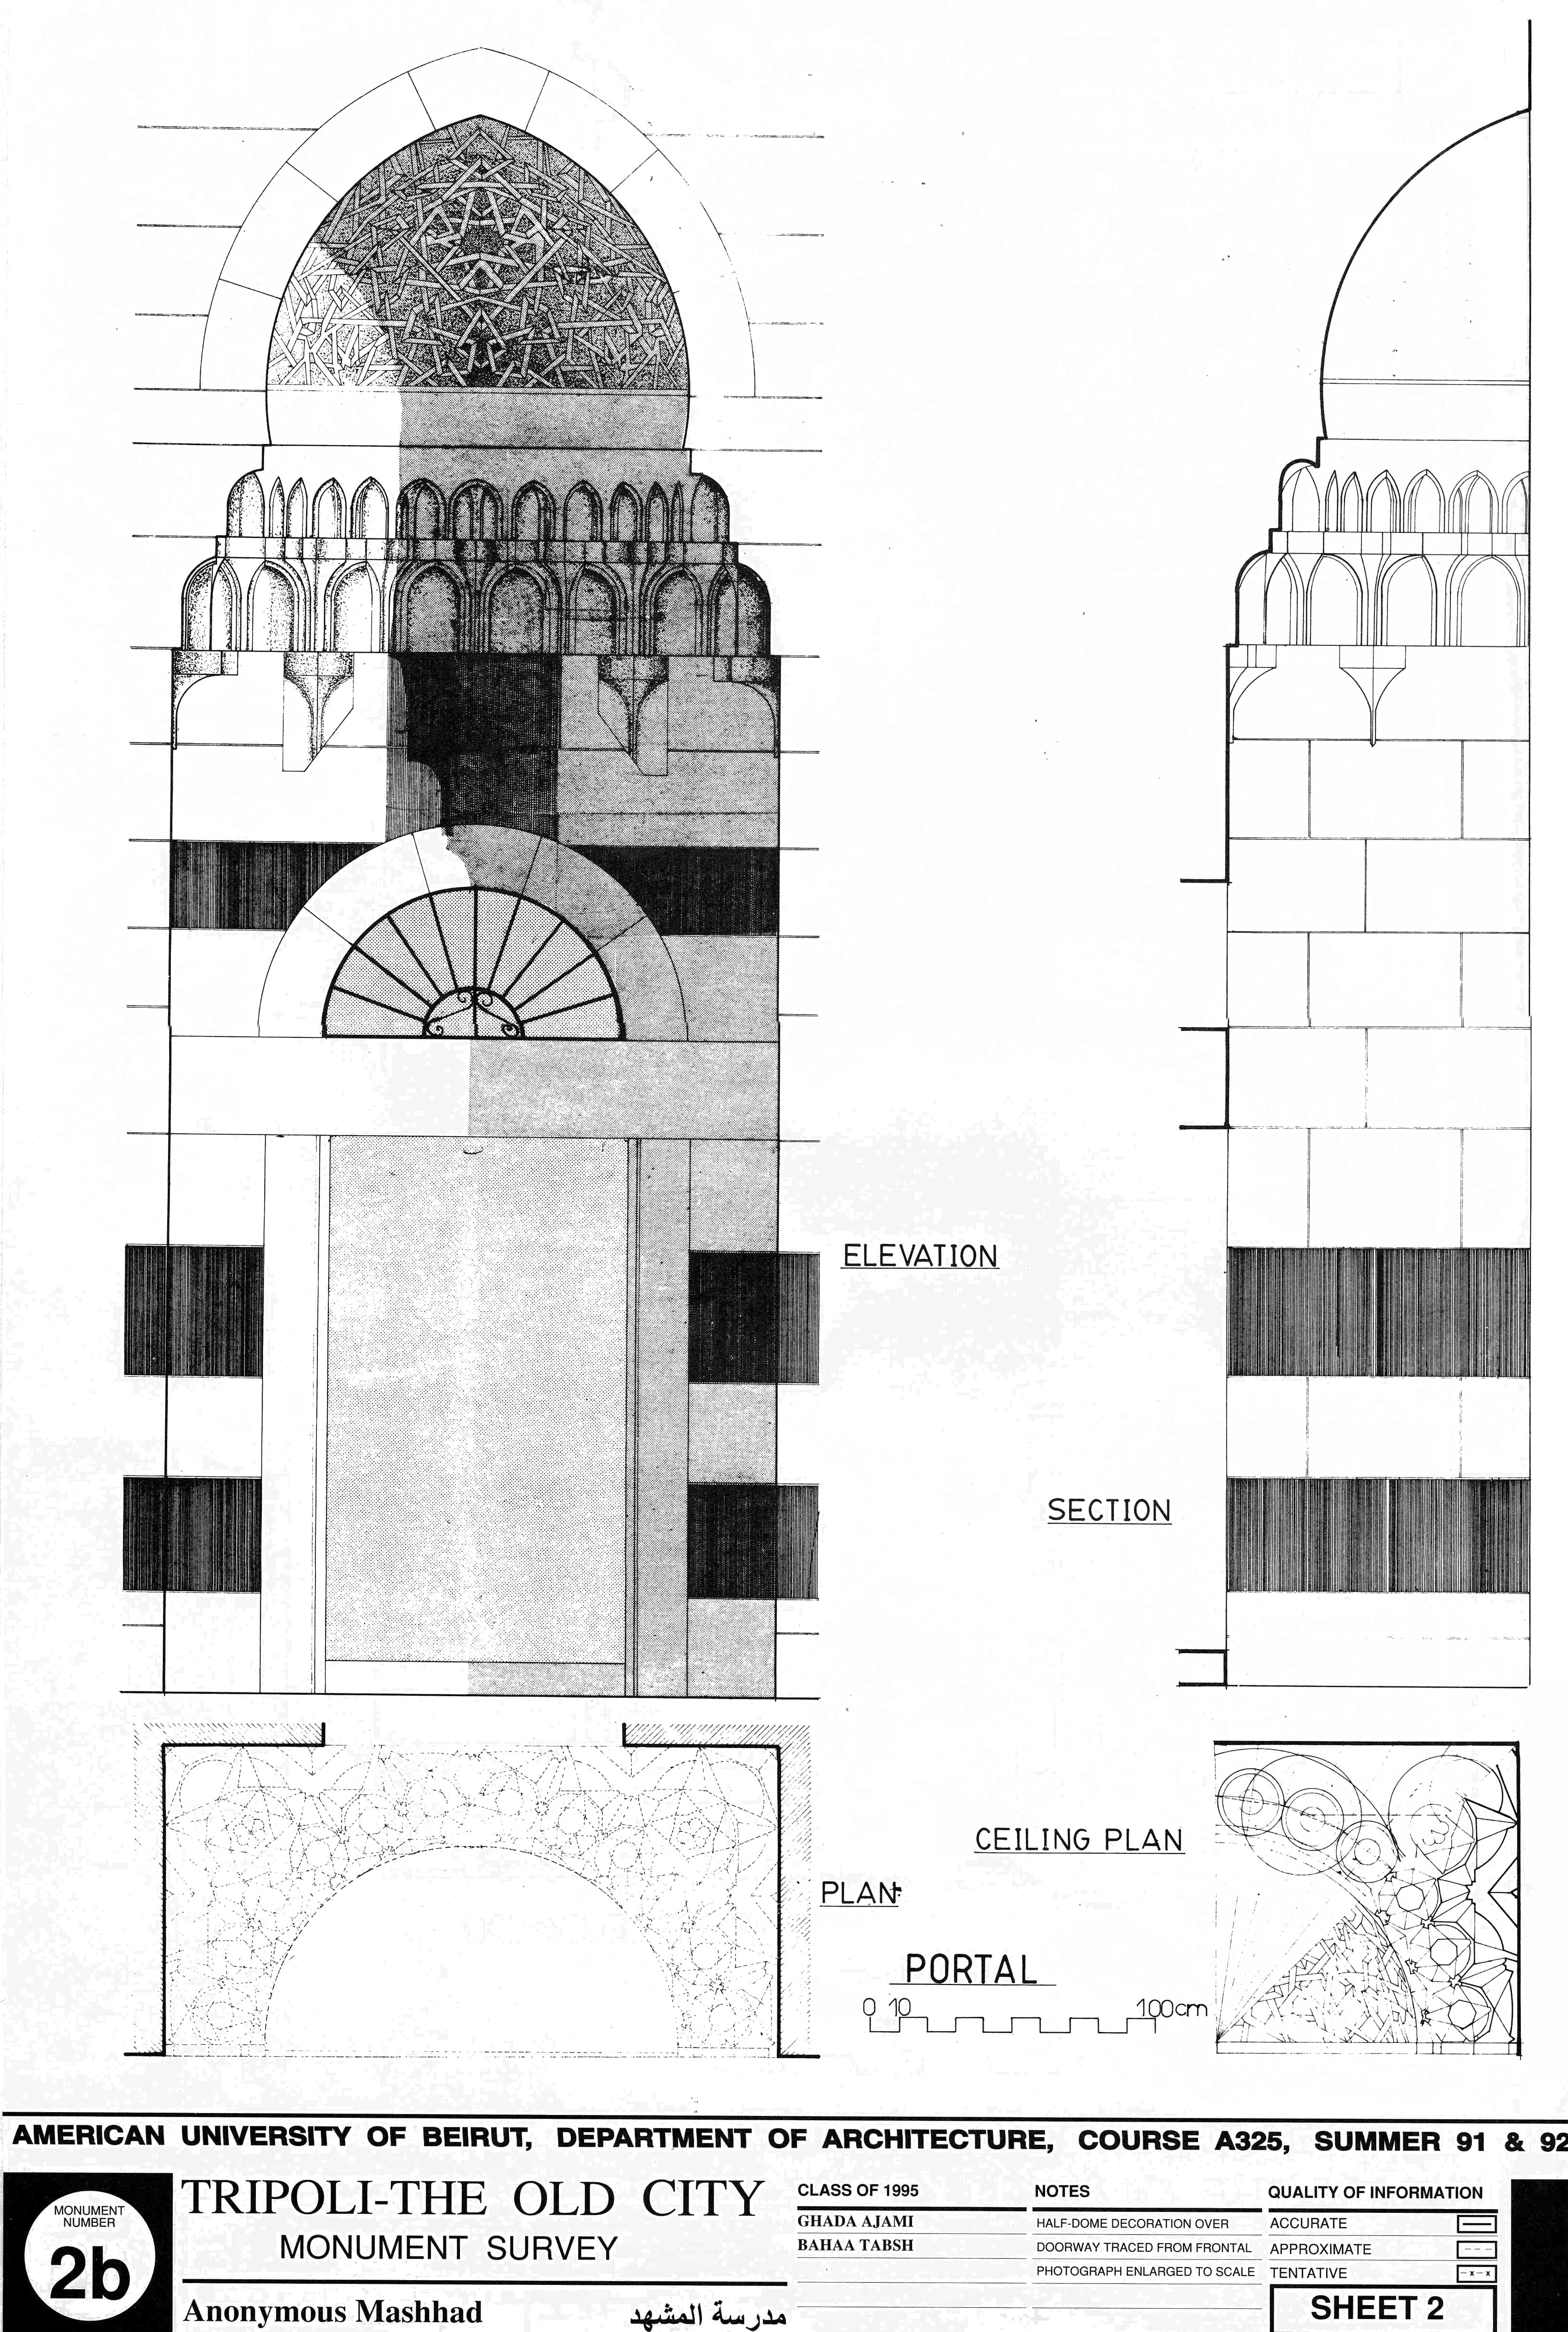 Anonymous Mashhad - Drawing of the building, based on survey: Portal plan, ceiling plan, elevation and section.